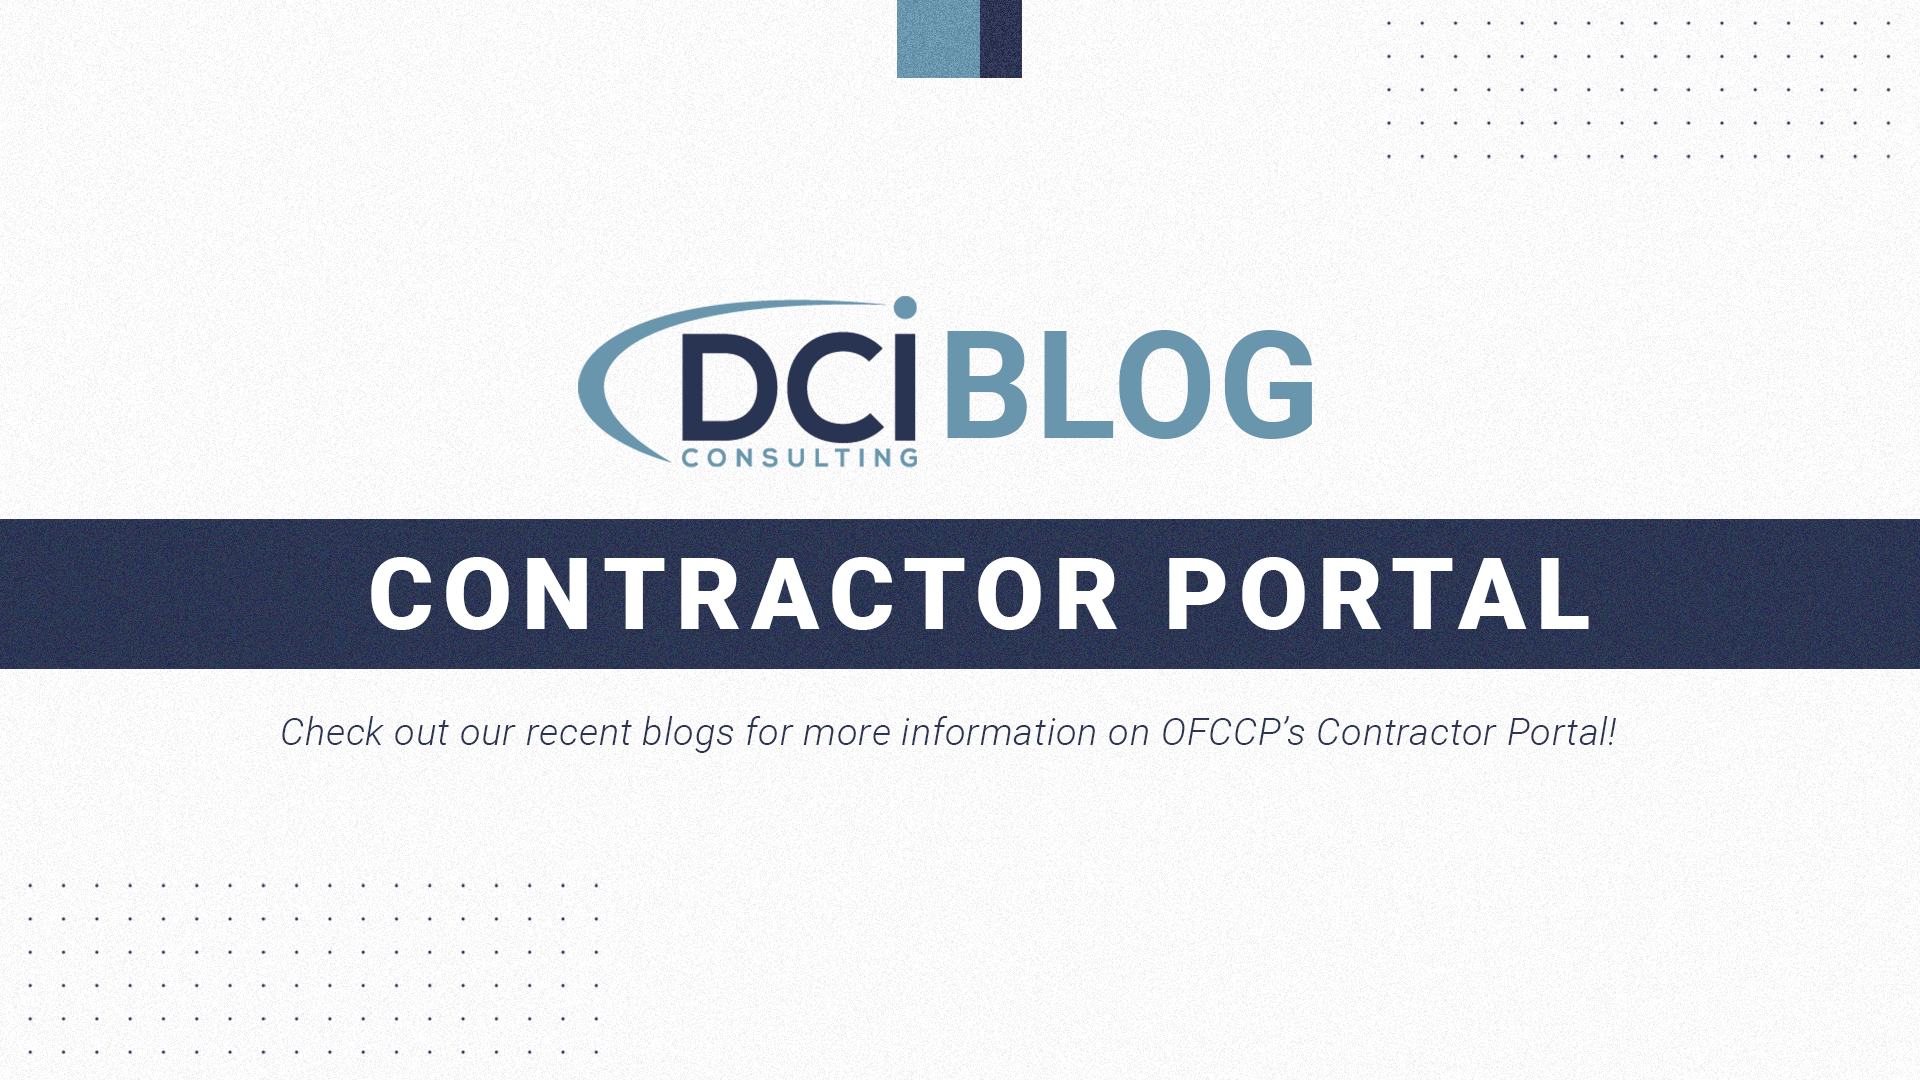 DCI Blogs on the Contractor Portal